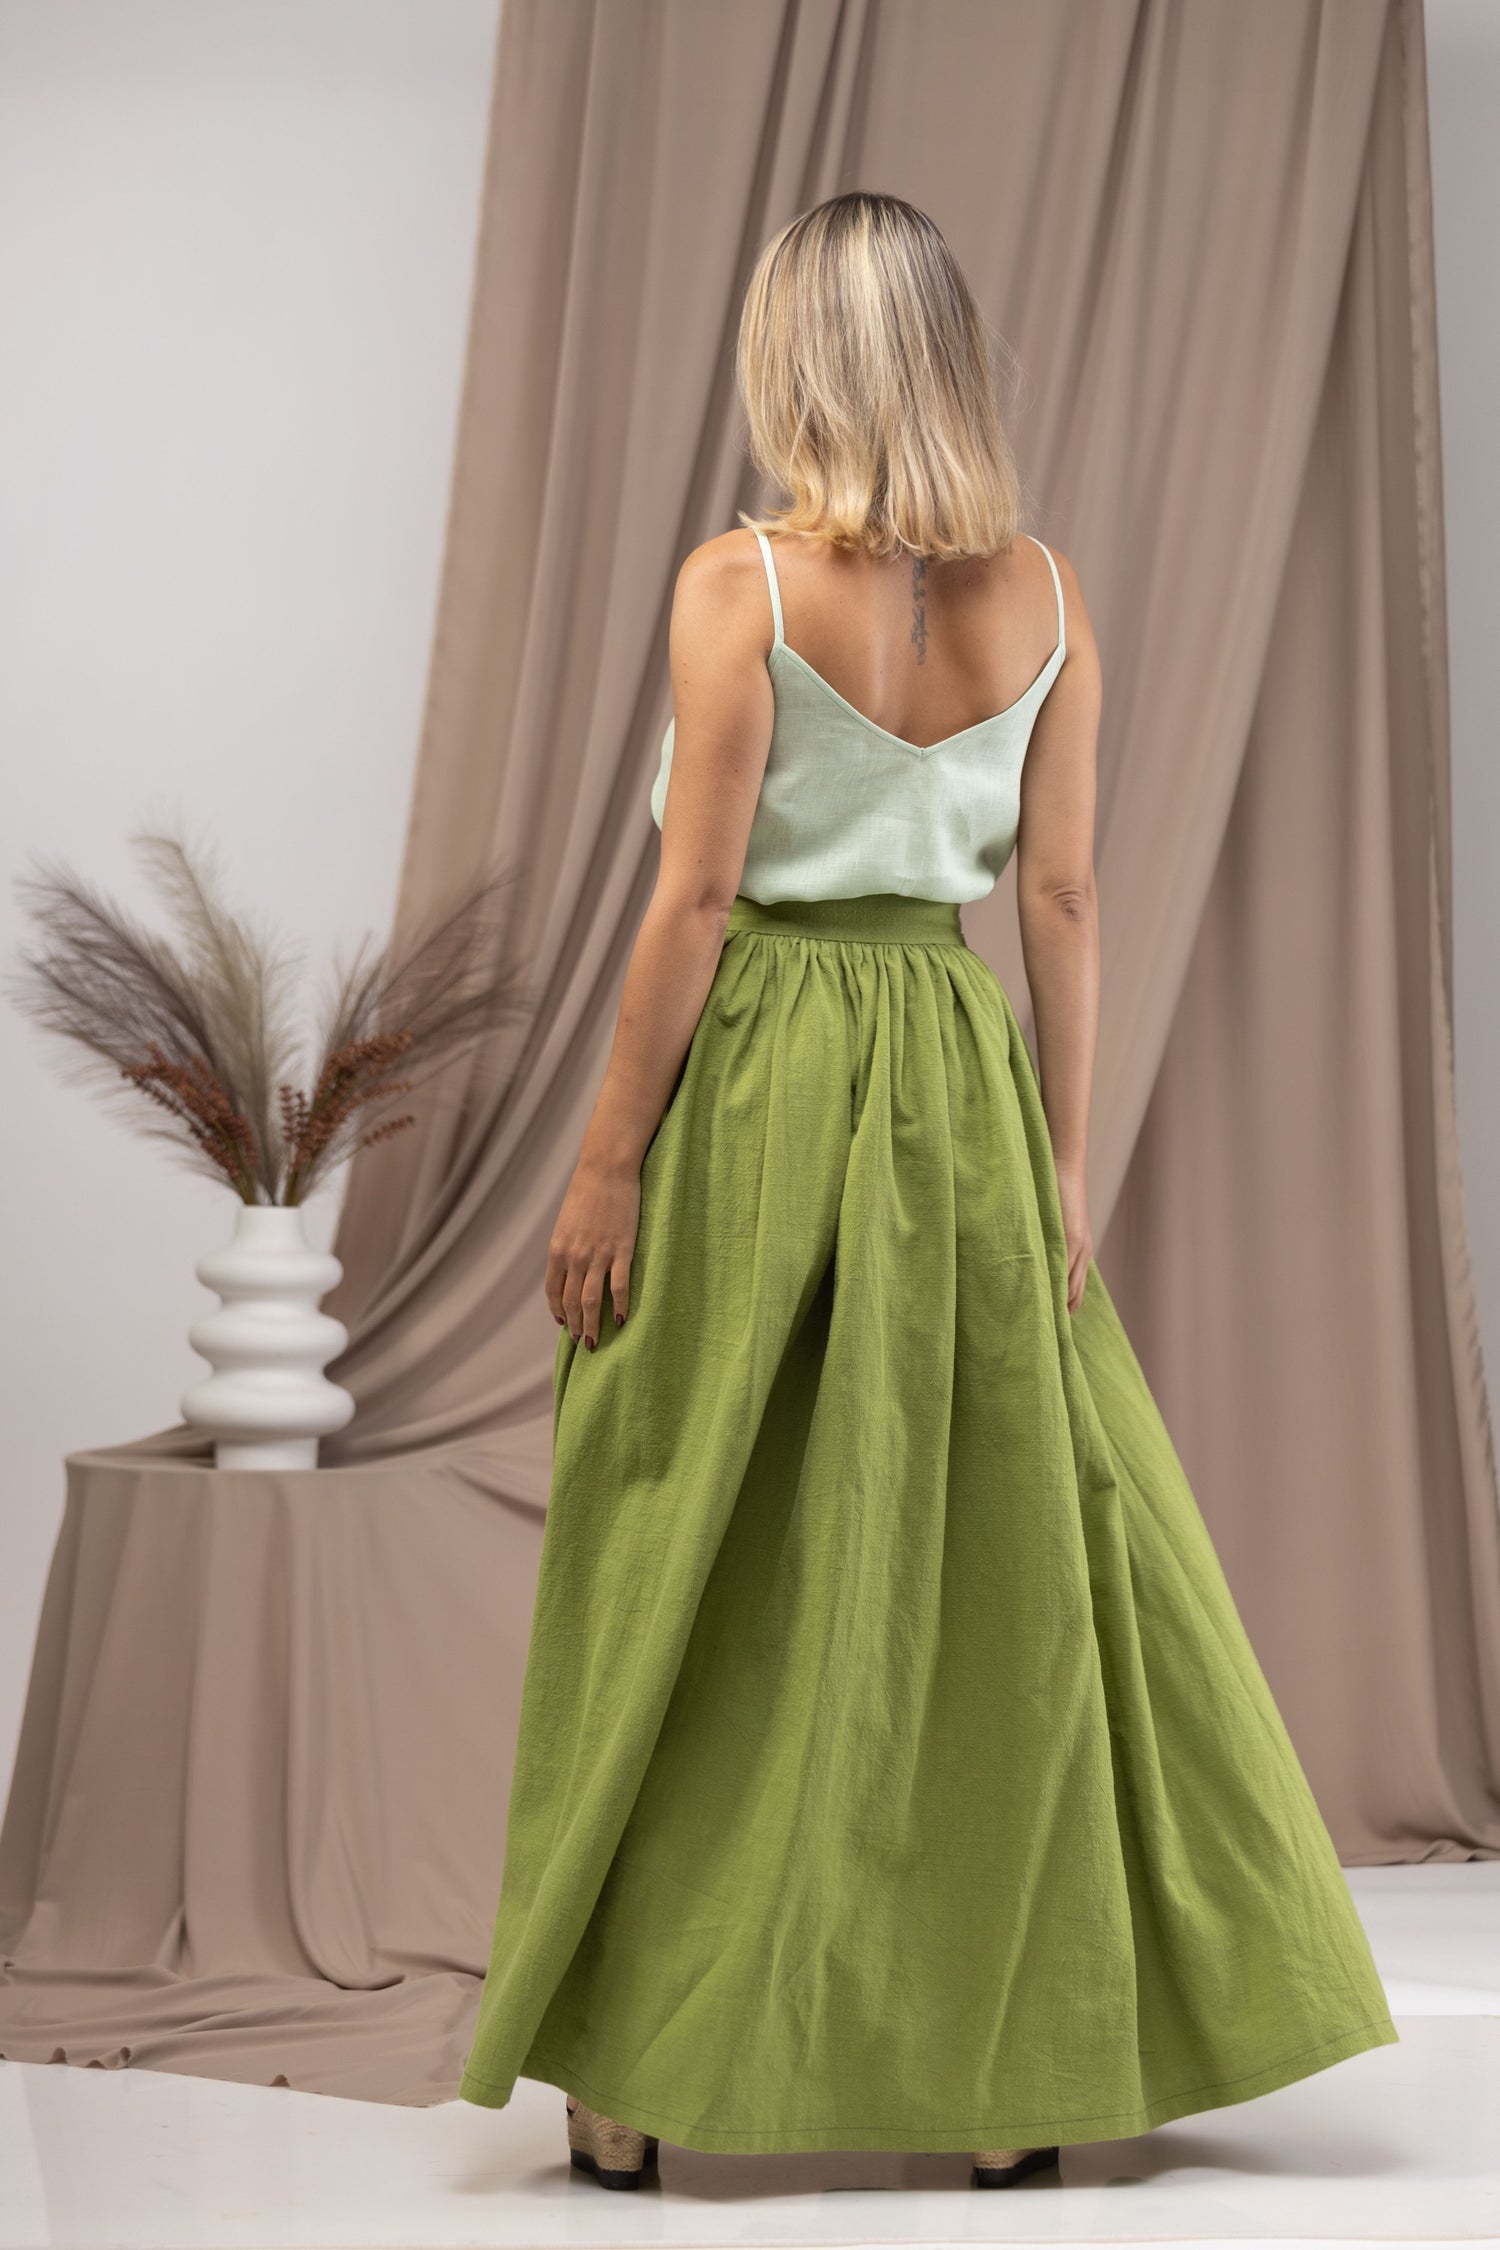 High Waist Linen Skirt with sewed in belt, perfect for any occasion - from NikkaPlace | Effortless fashion for easy living